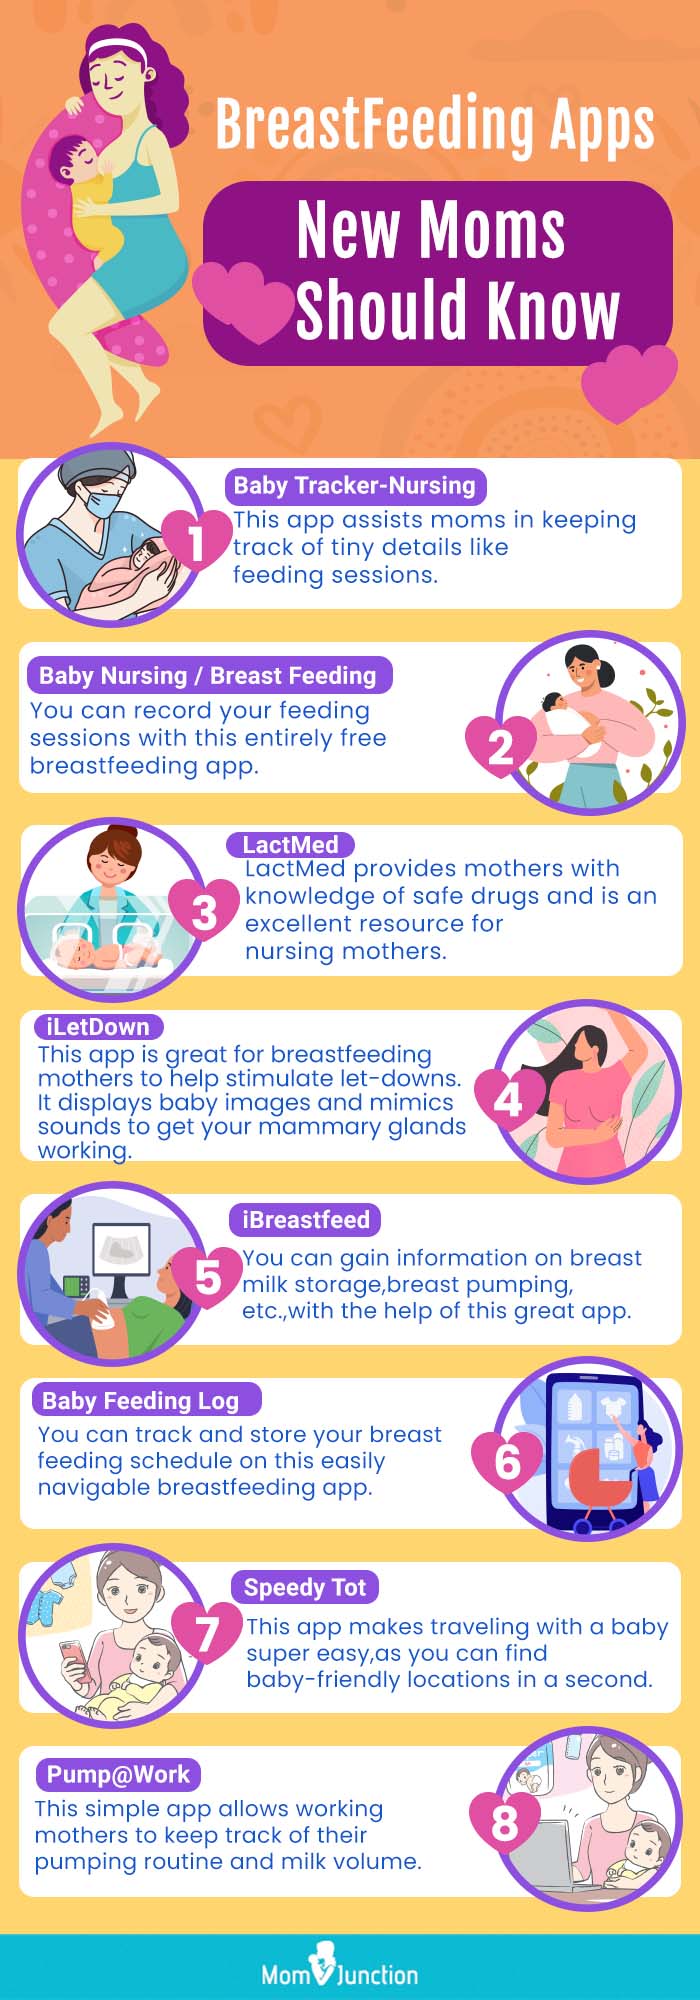 breastfeeding apps for mothers (infographic)